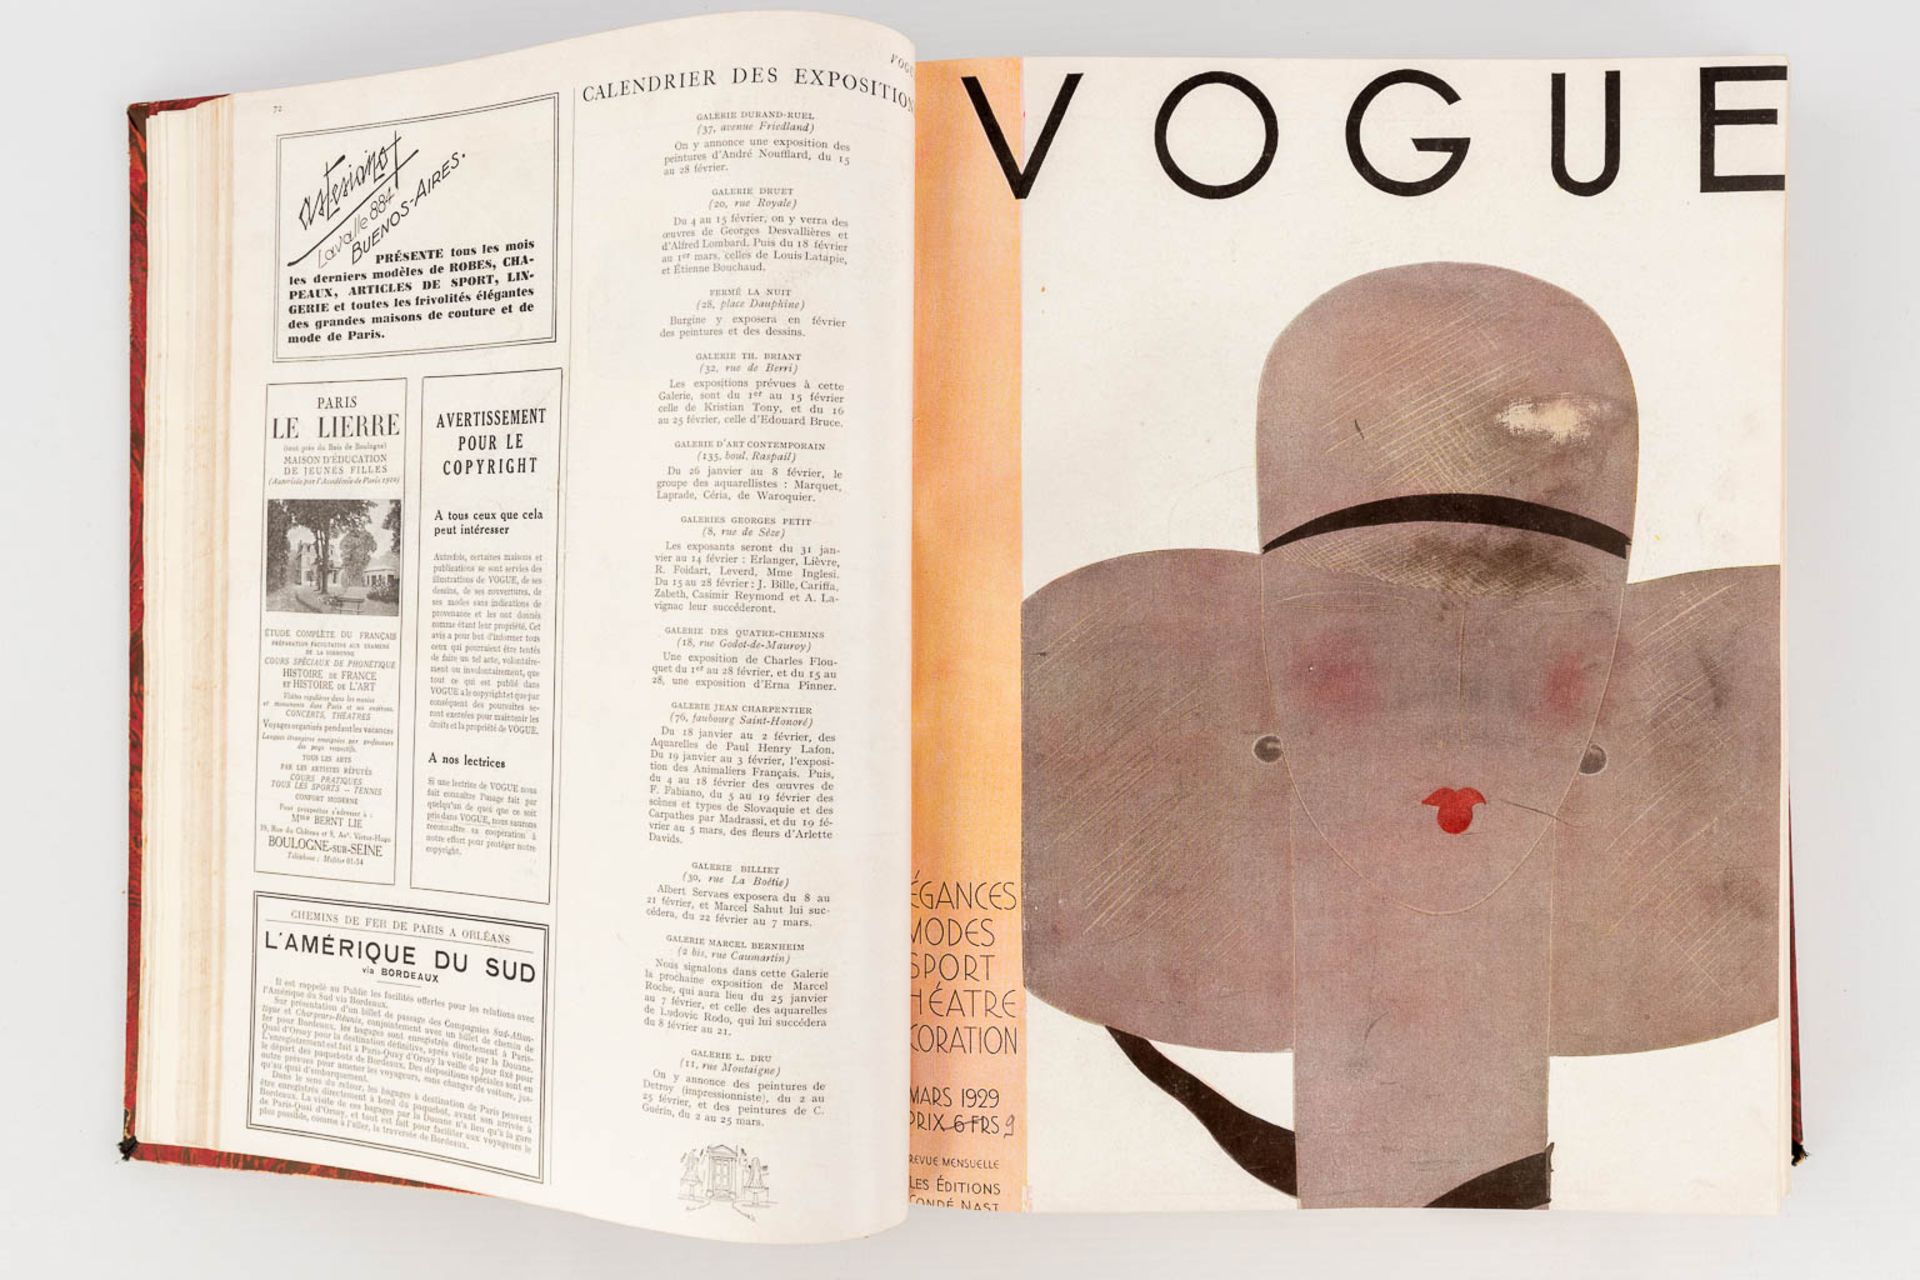 An assembled book with the Vogue magazine, 1929. (L: 5 x W: 25,5 x H: 31,5 cm) - Image 5 of 18